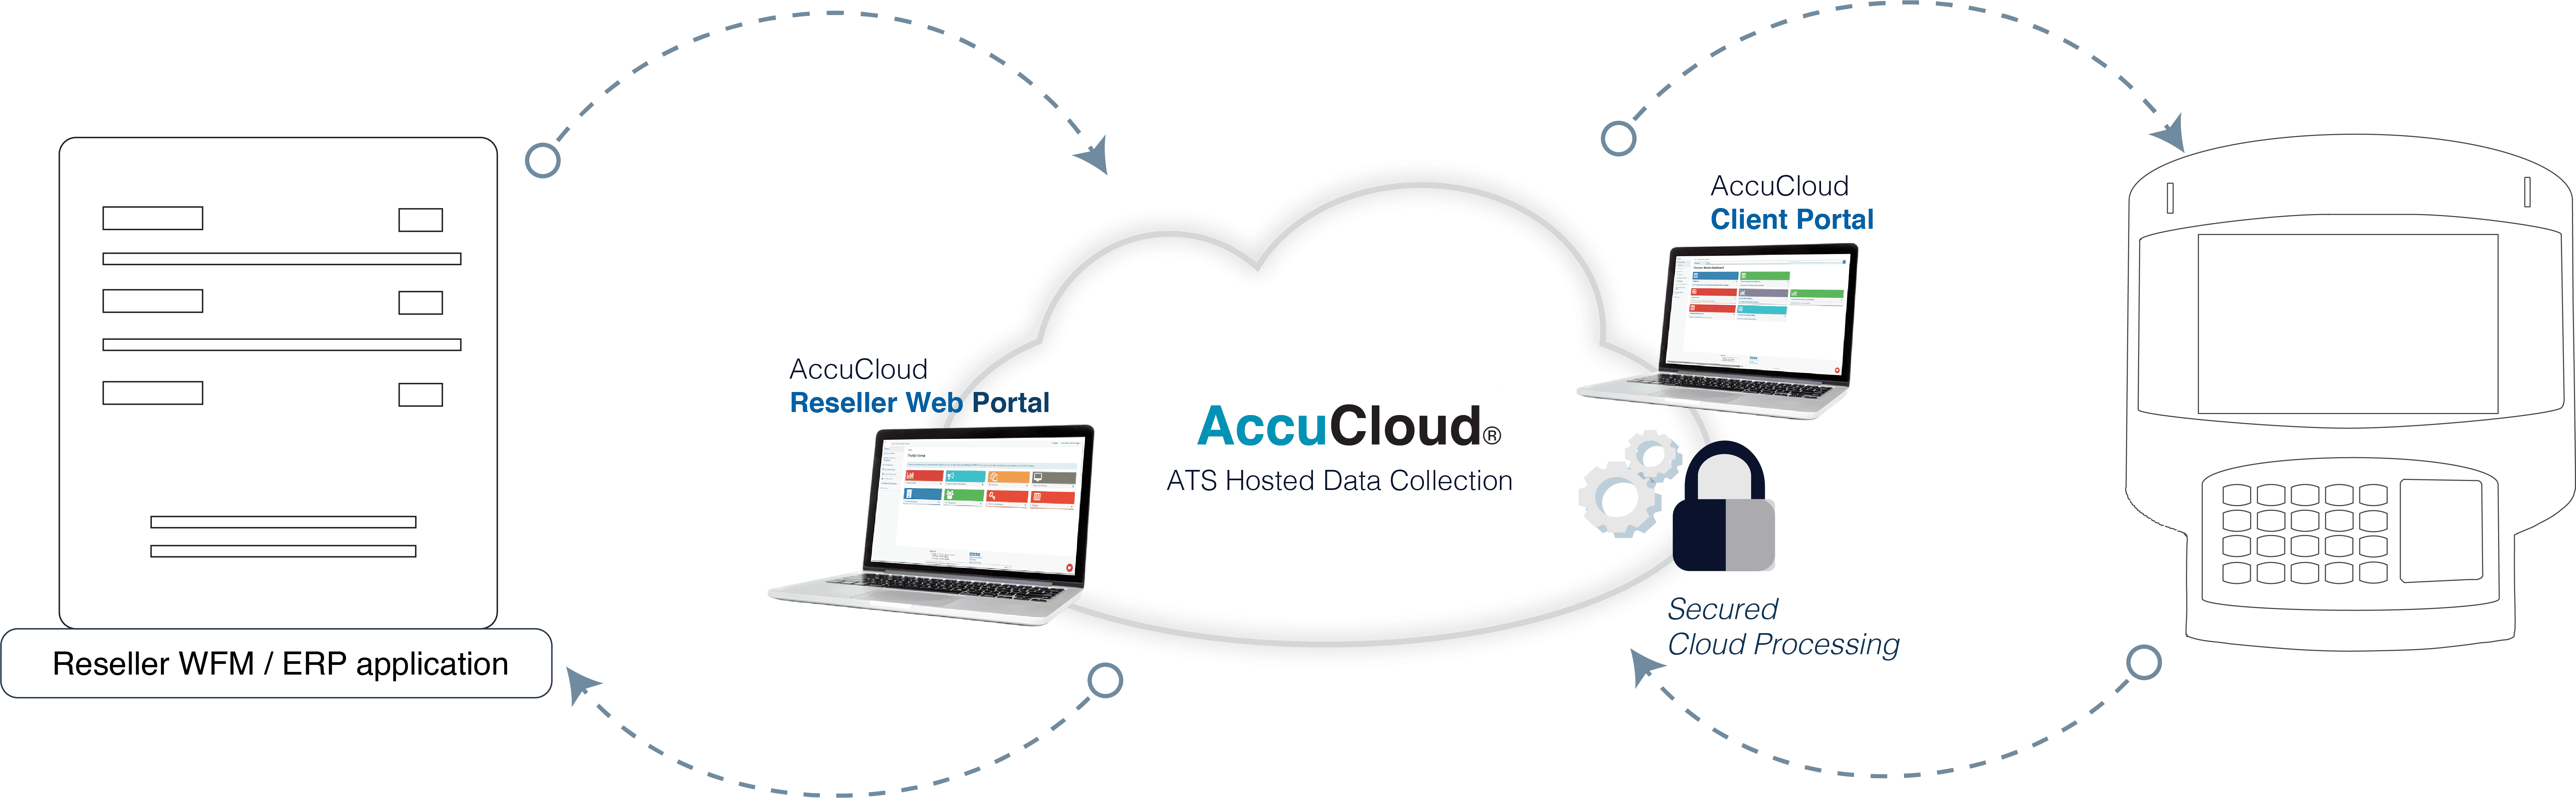 accucloud architecture